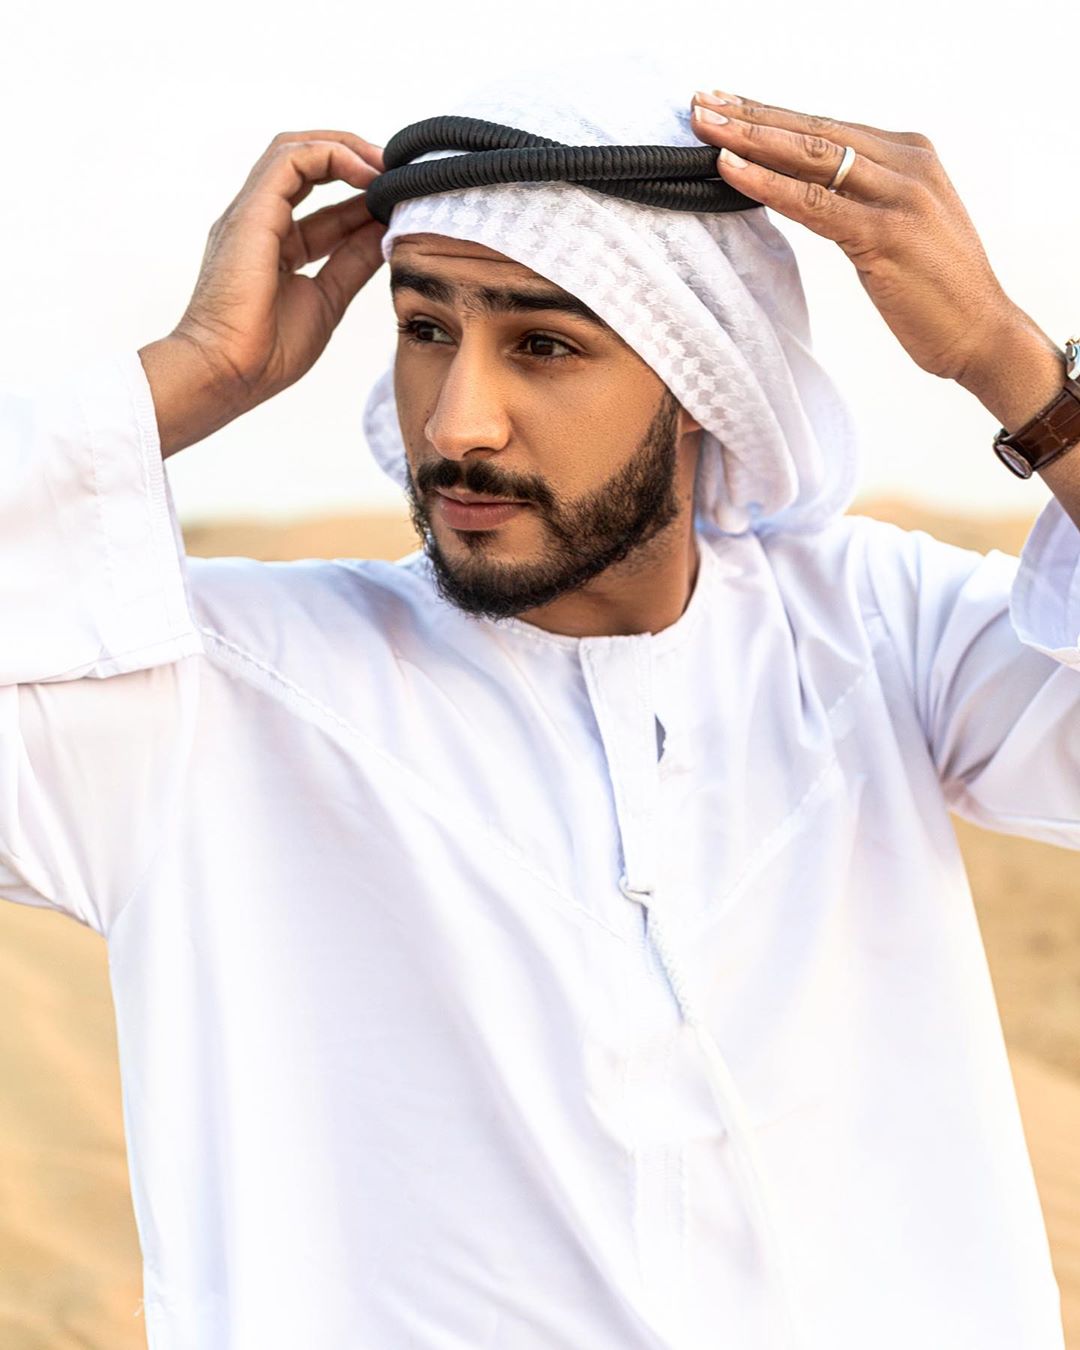 A young Arab man with a trimmed beard poses in traditional Emirati attire, wearing a white kandura robe and ghutra headdress, against a neutral desert background.